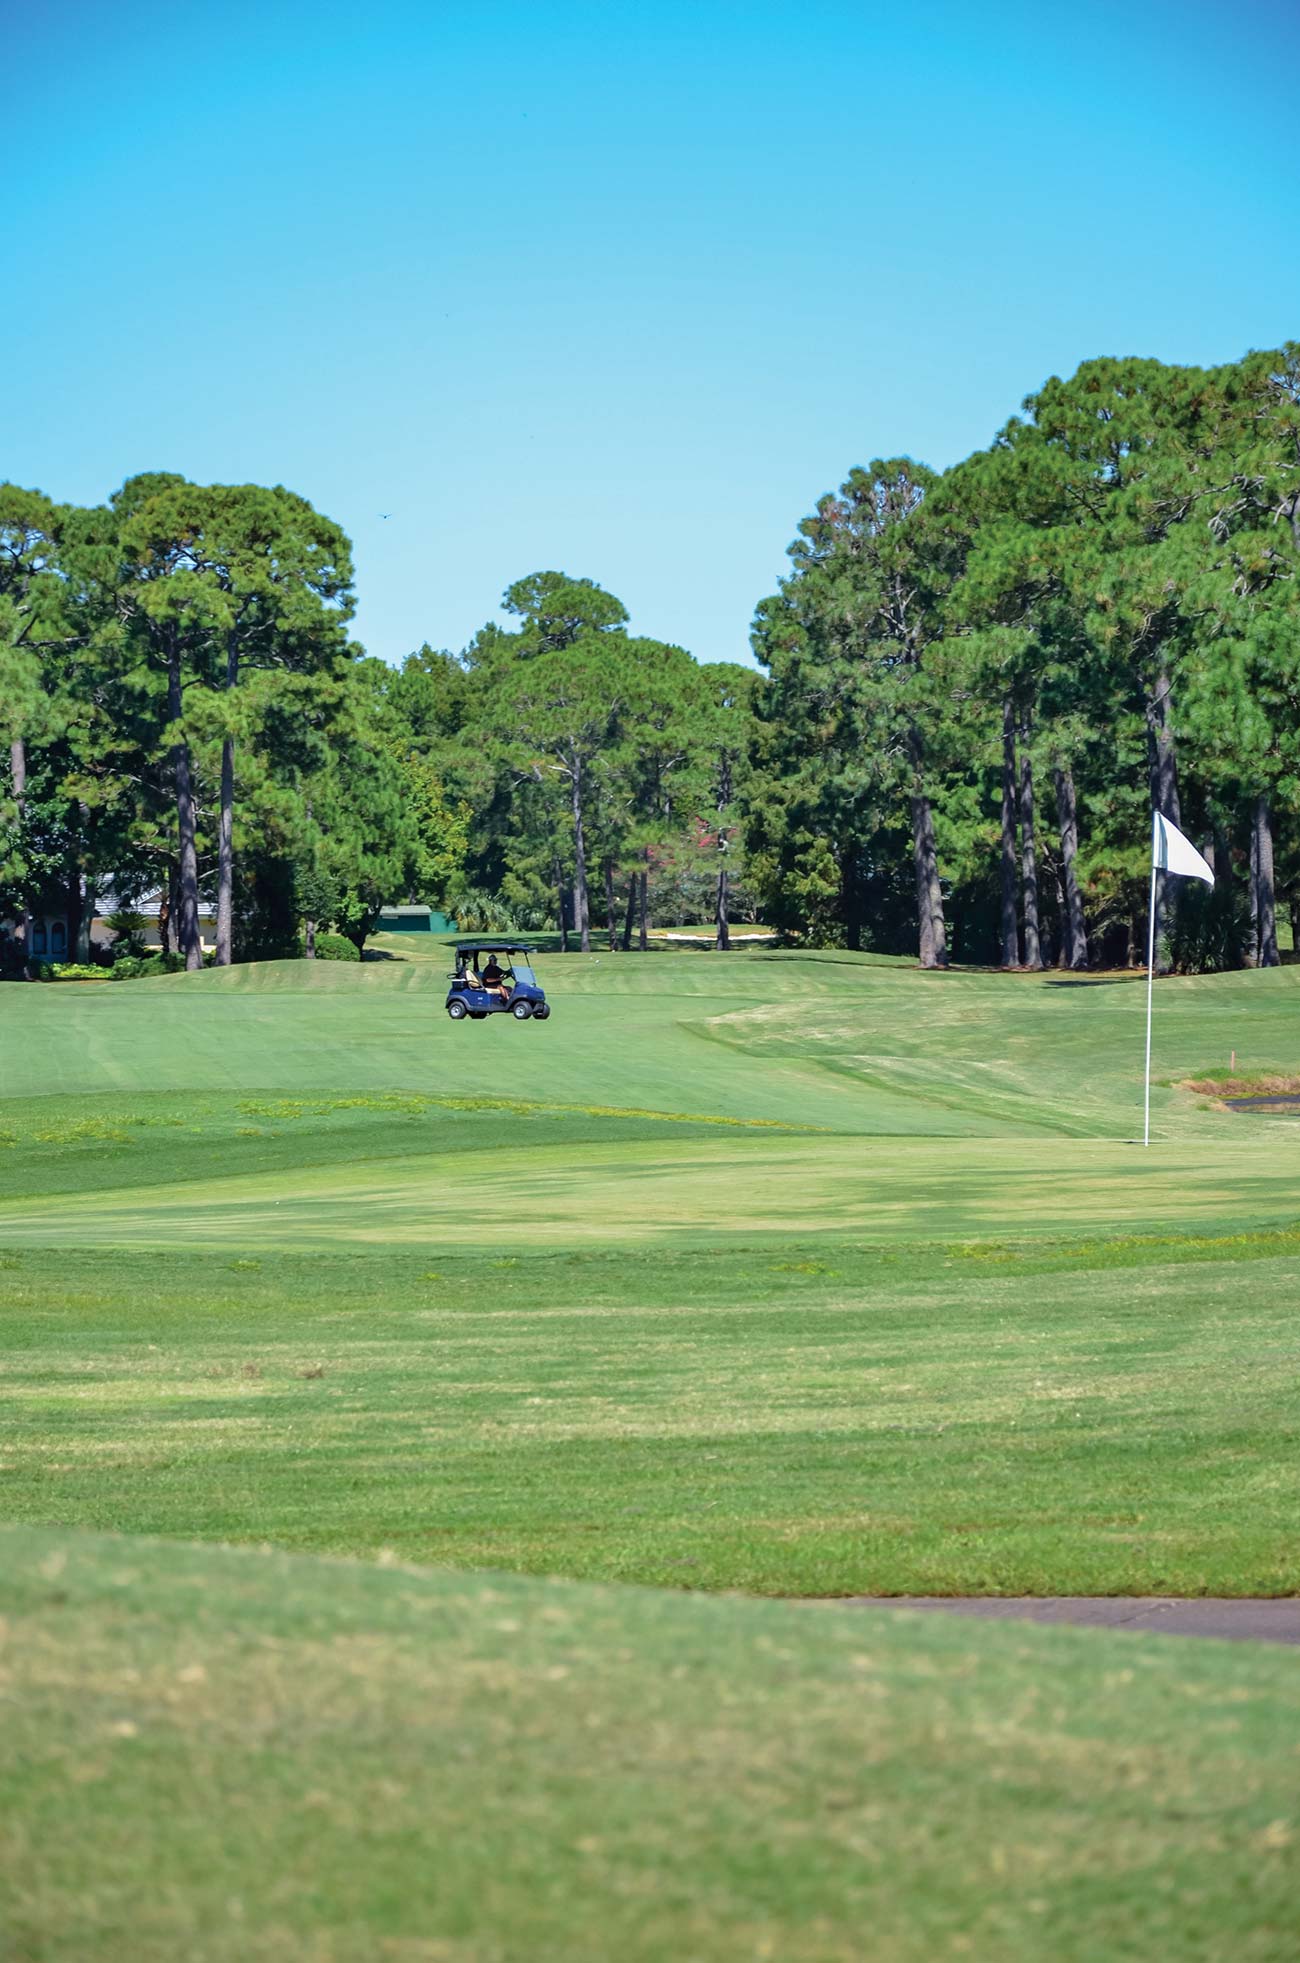 Pick up your clubs and find your bliss where the sun shines on the greens - photo 16